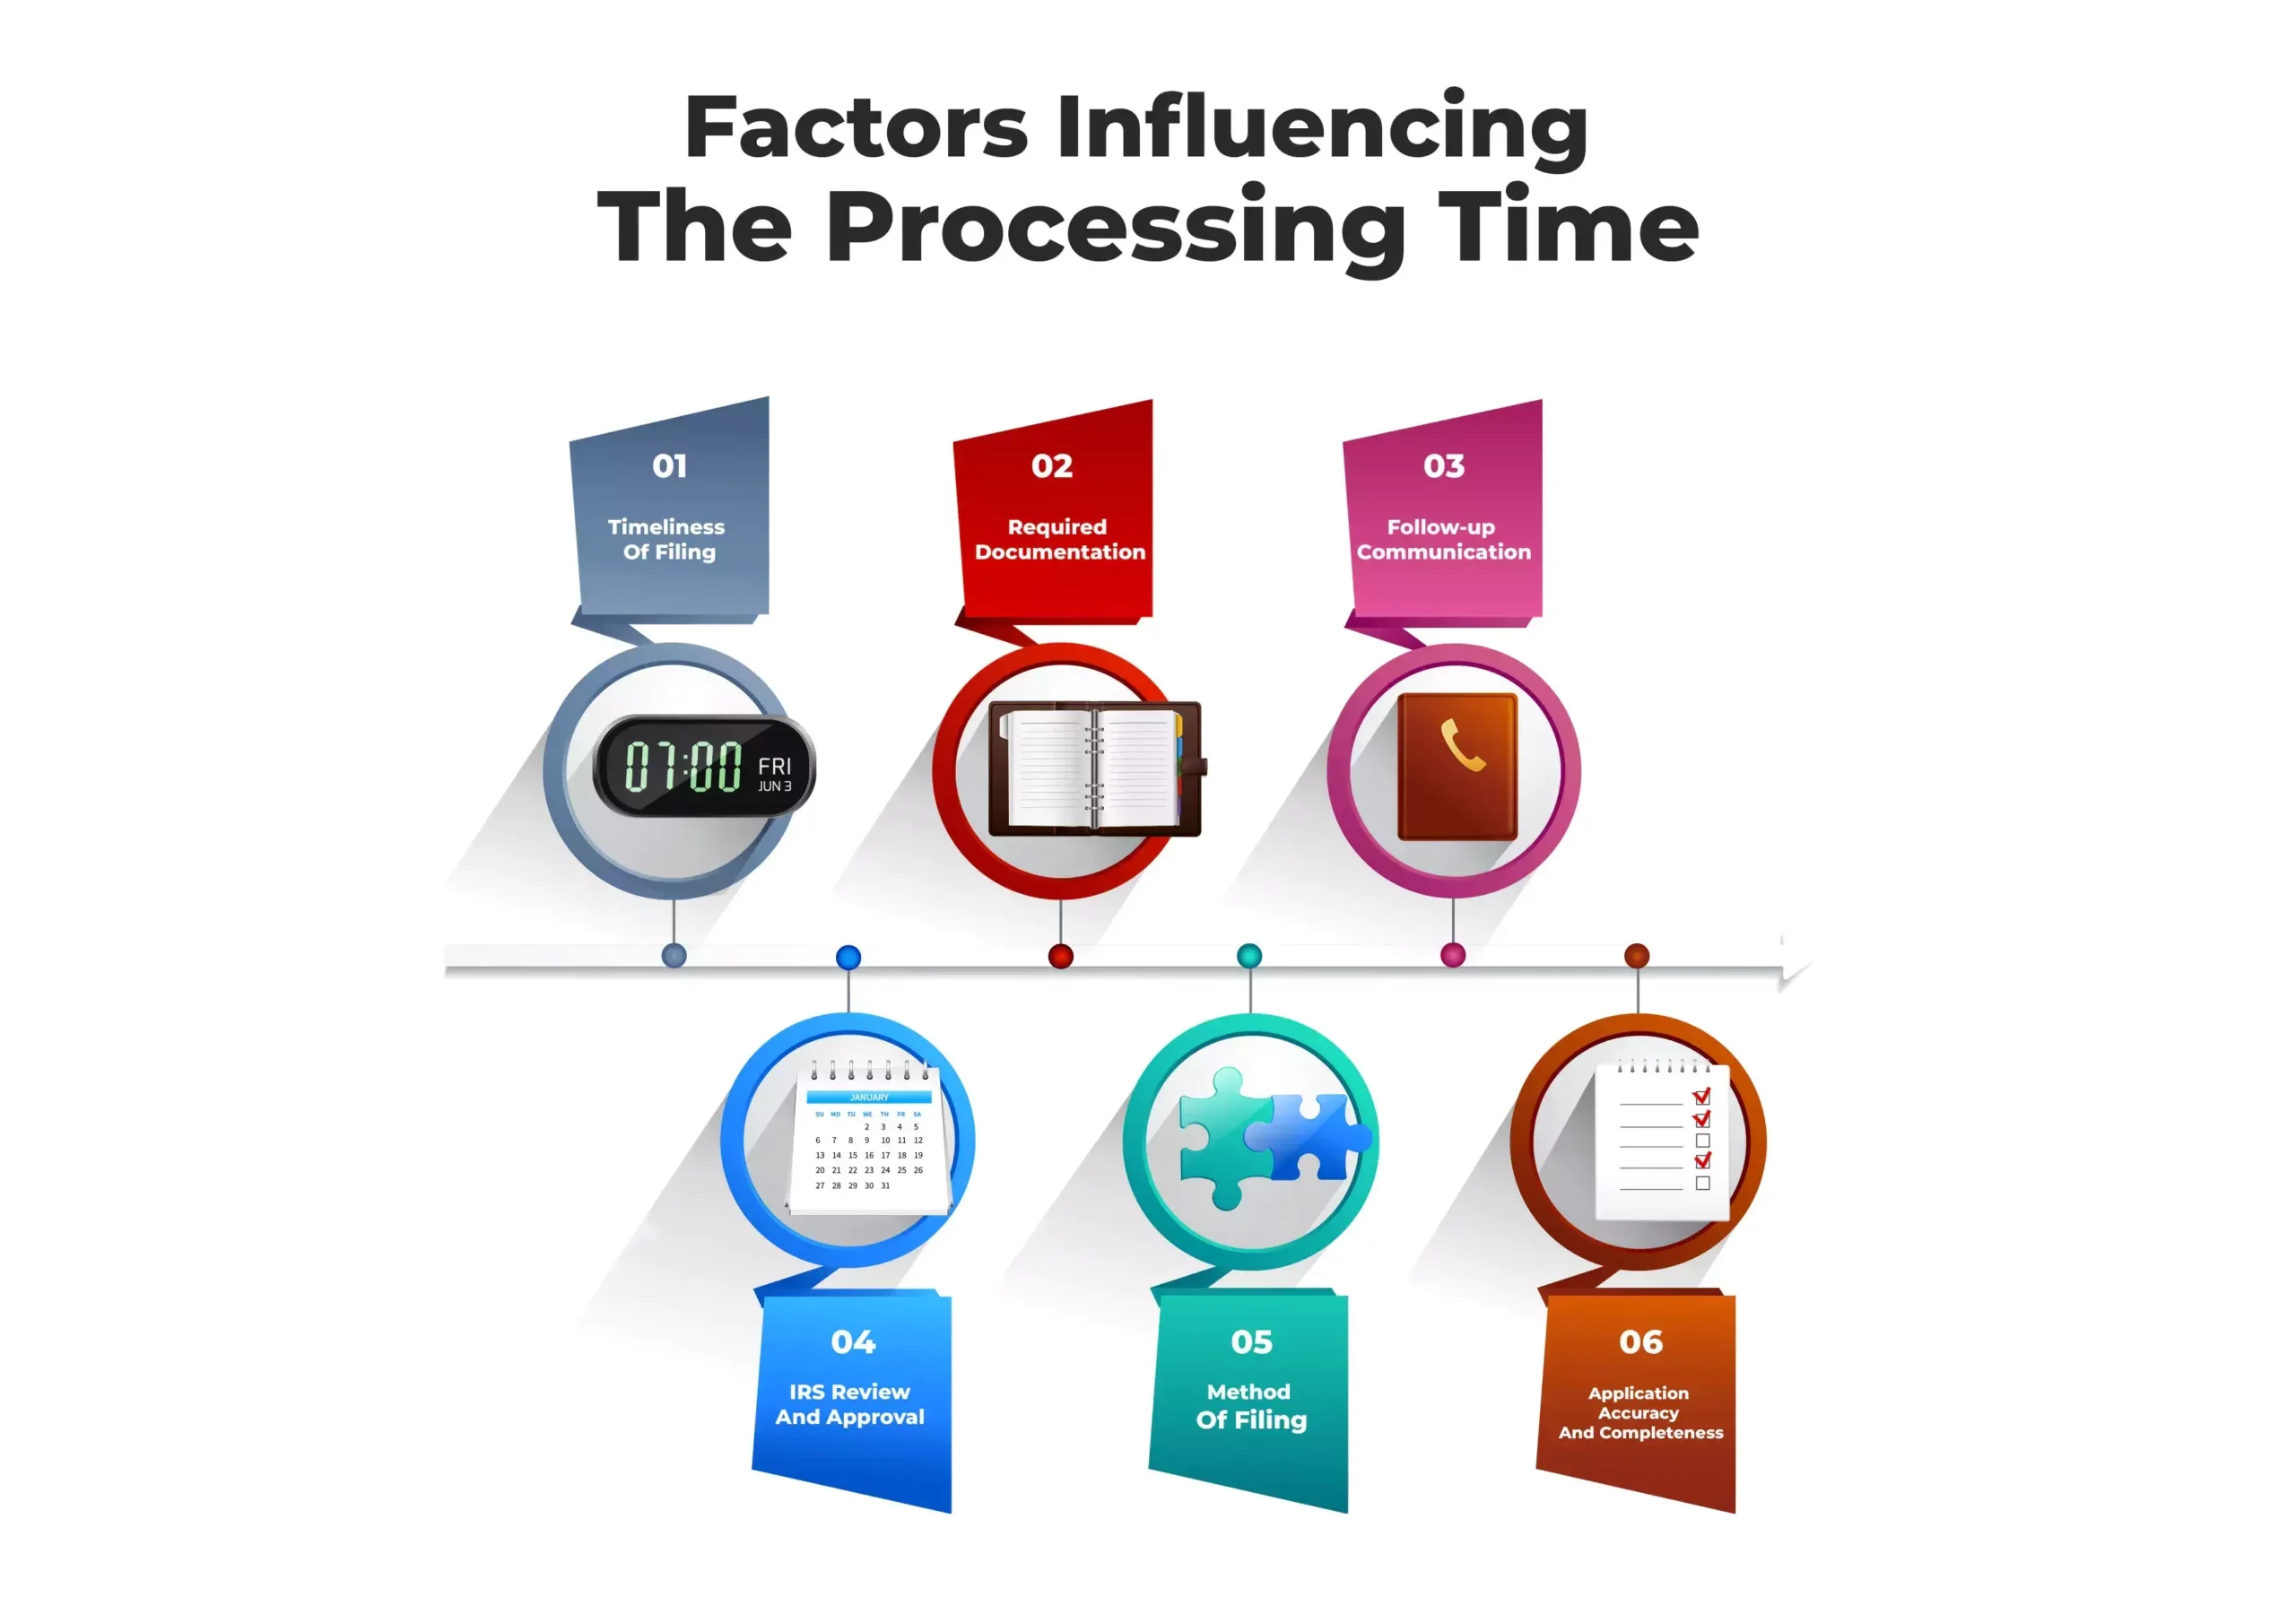 Factors Influencing the Processing Time